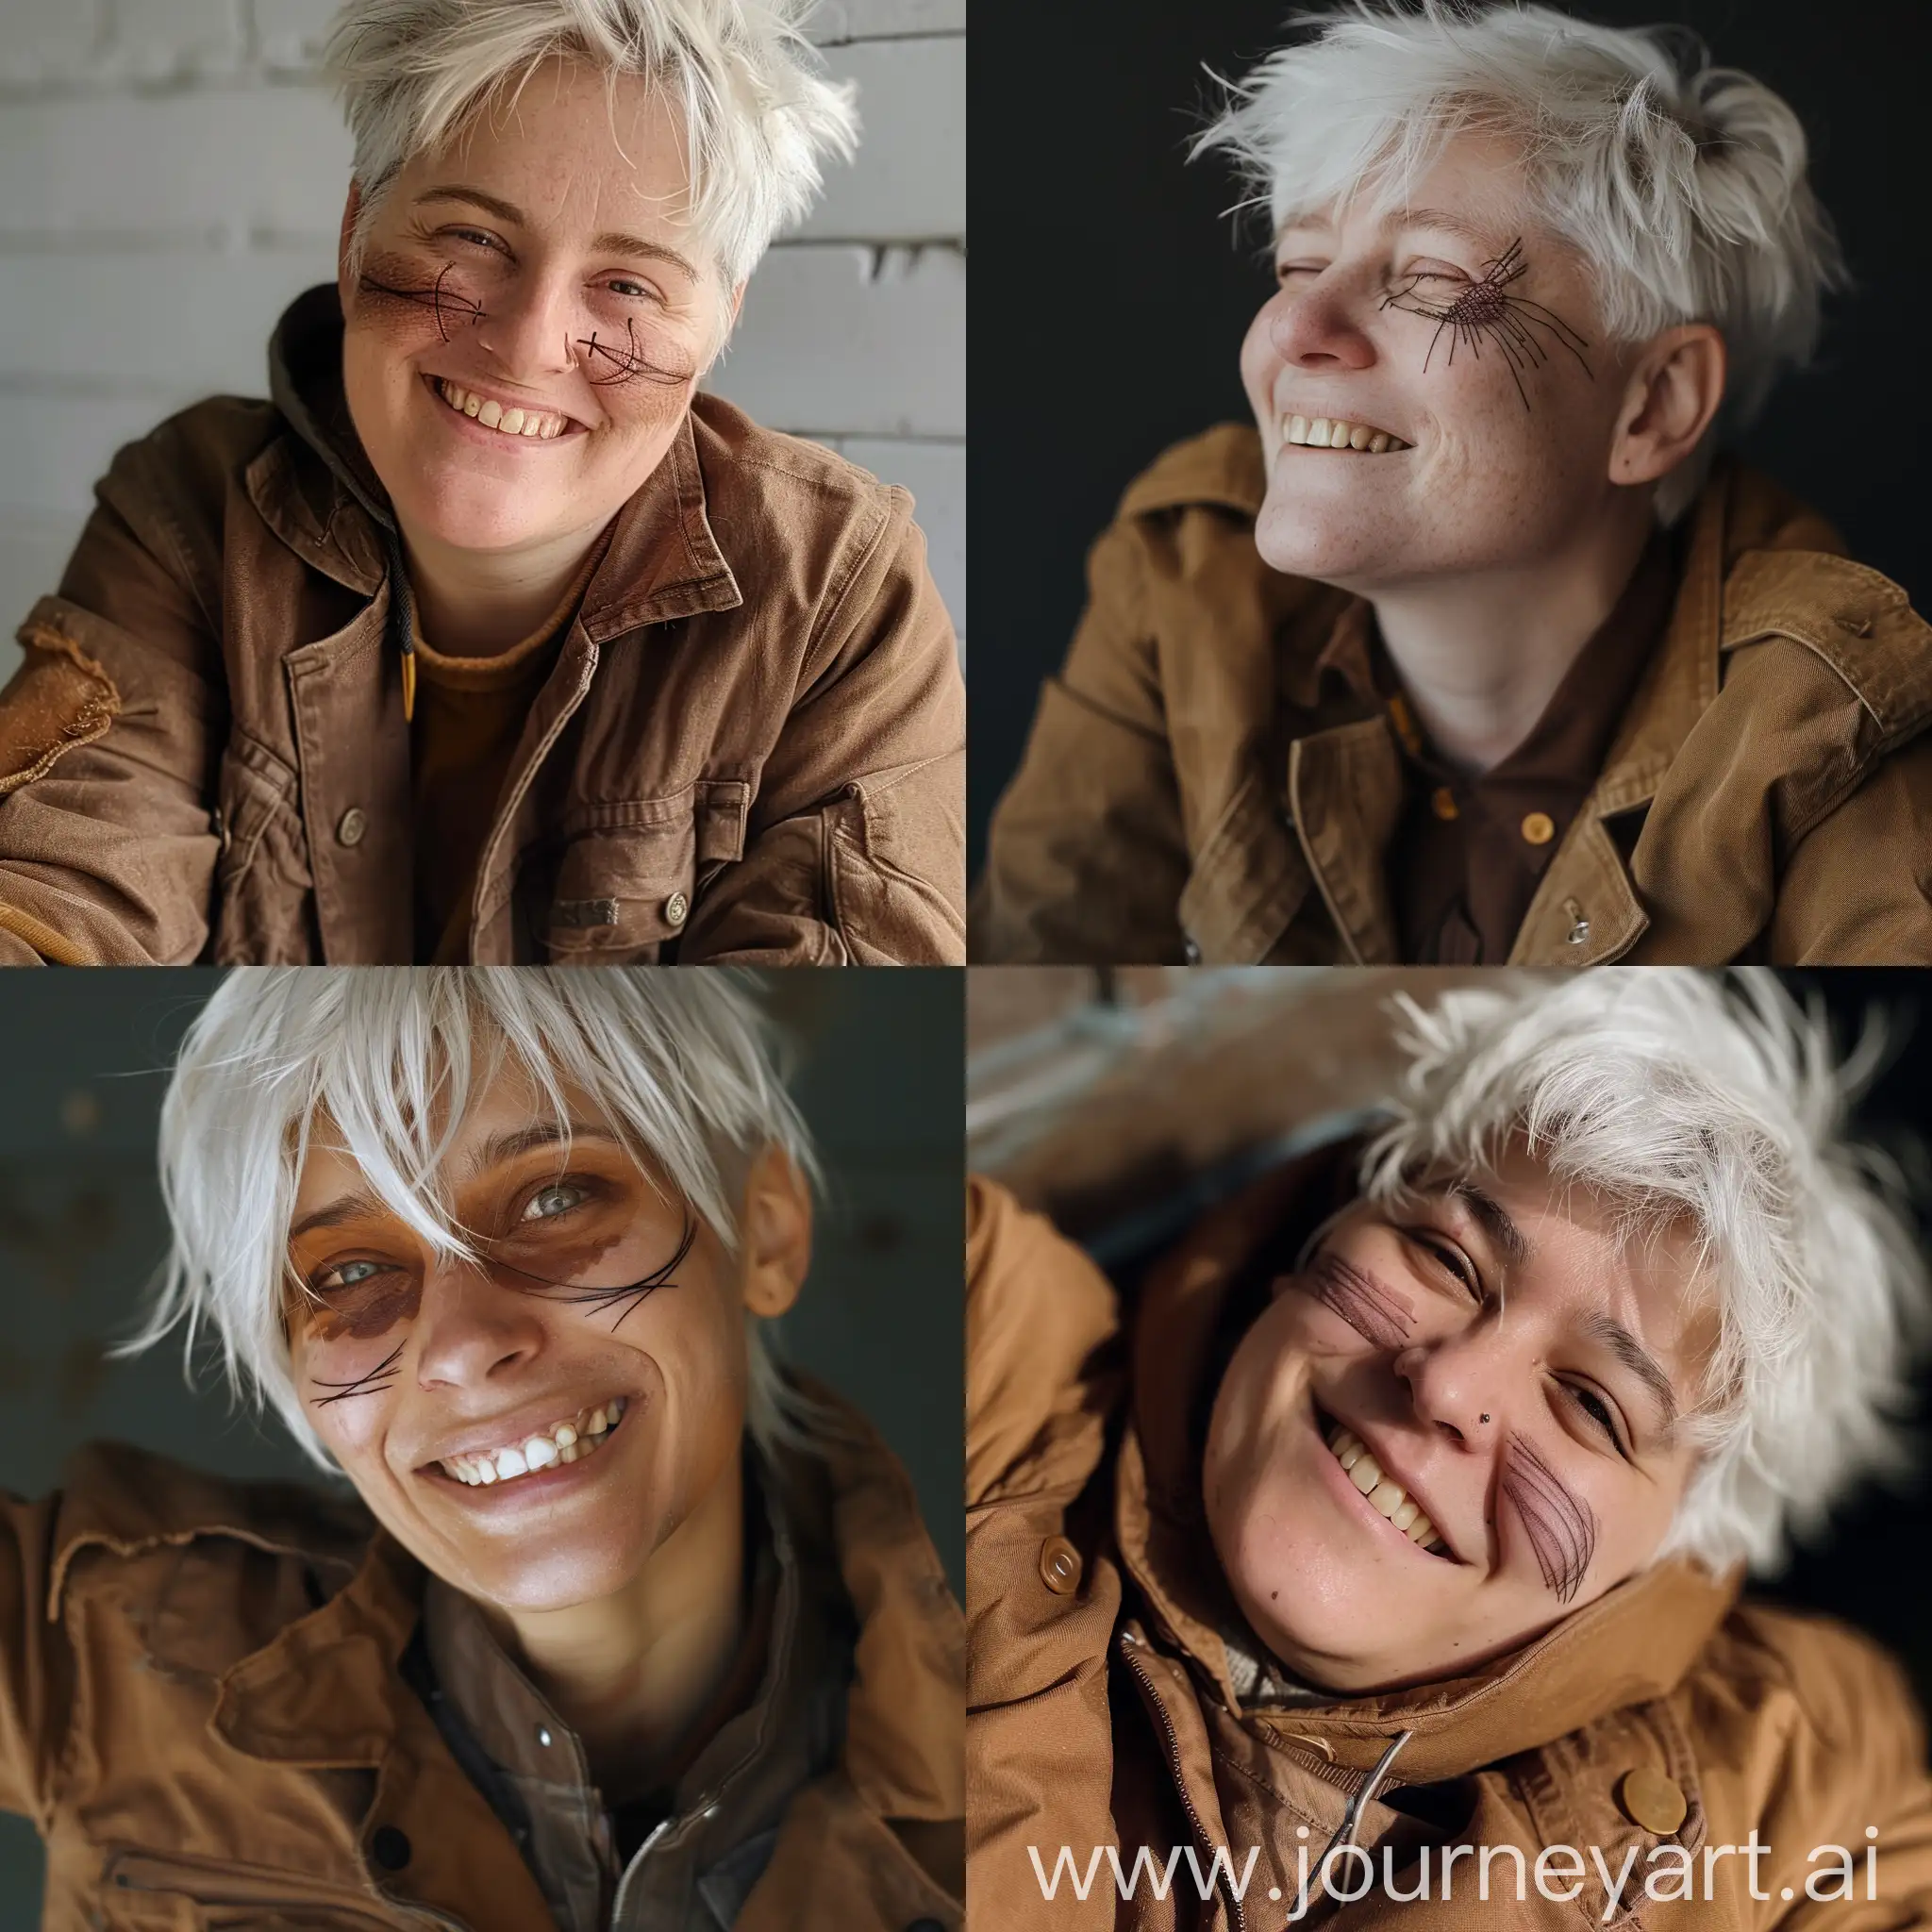 Smiling-Person-with-White-Hair-and-Brown-Jacket-Sporting-a-Scar-Covering-Both-Eyes